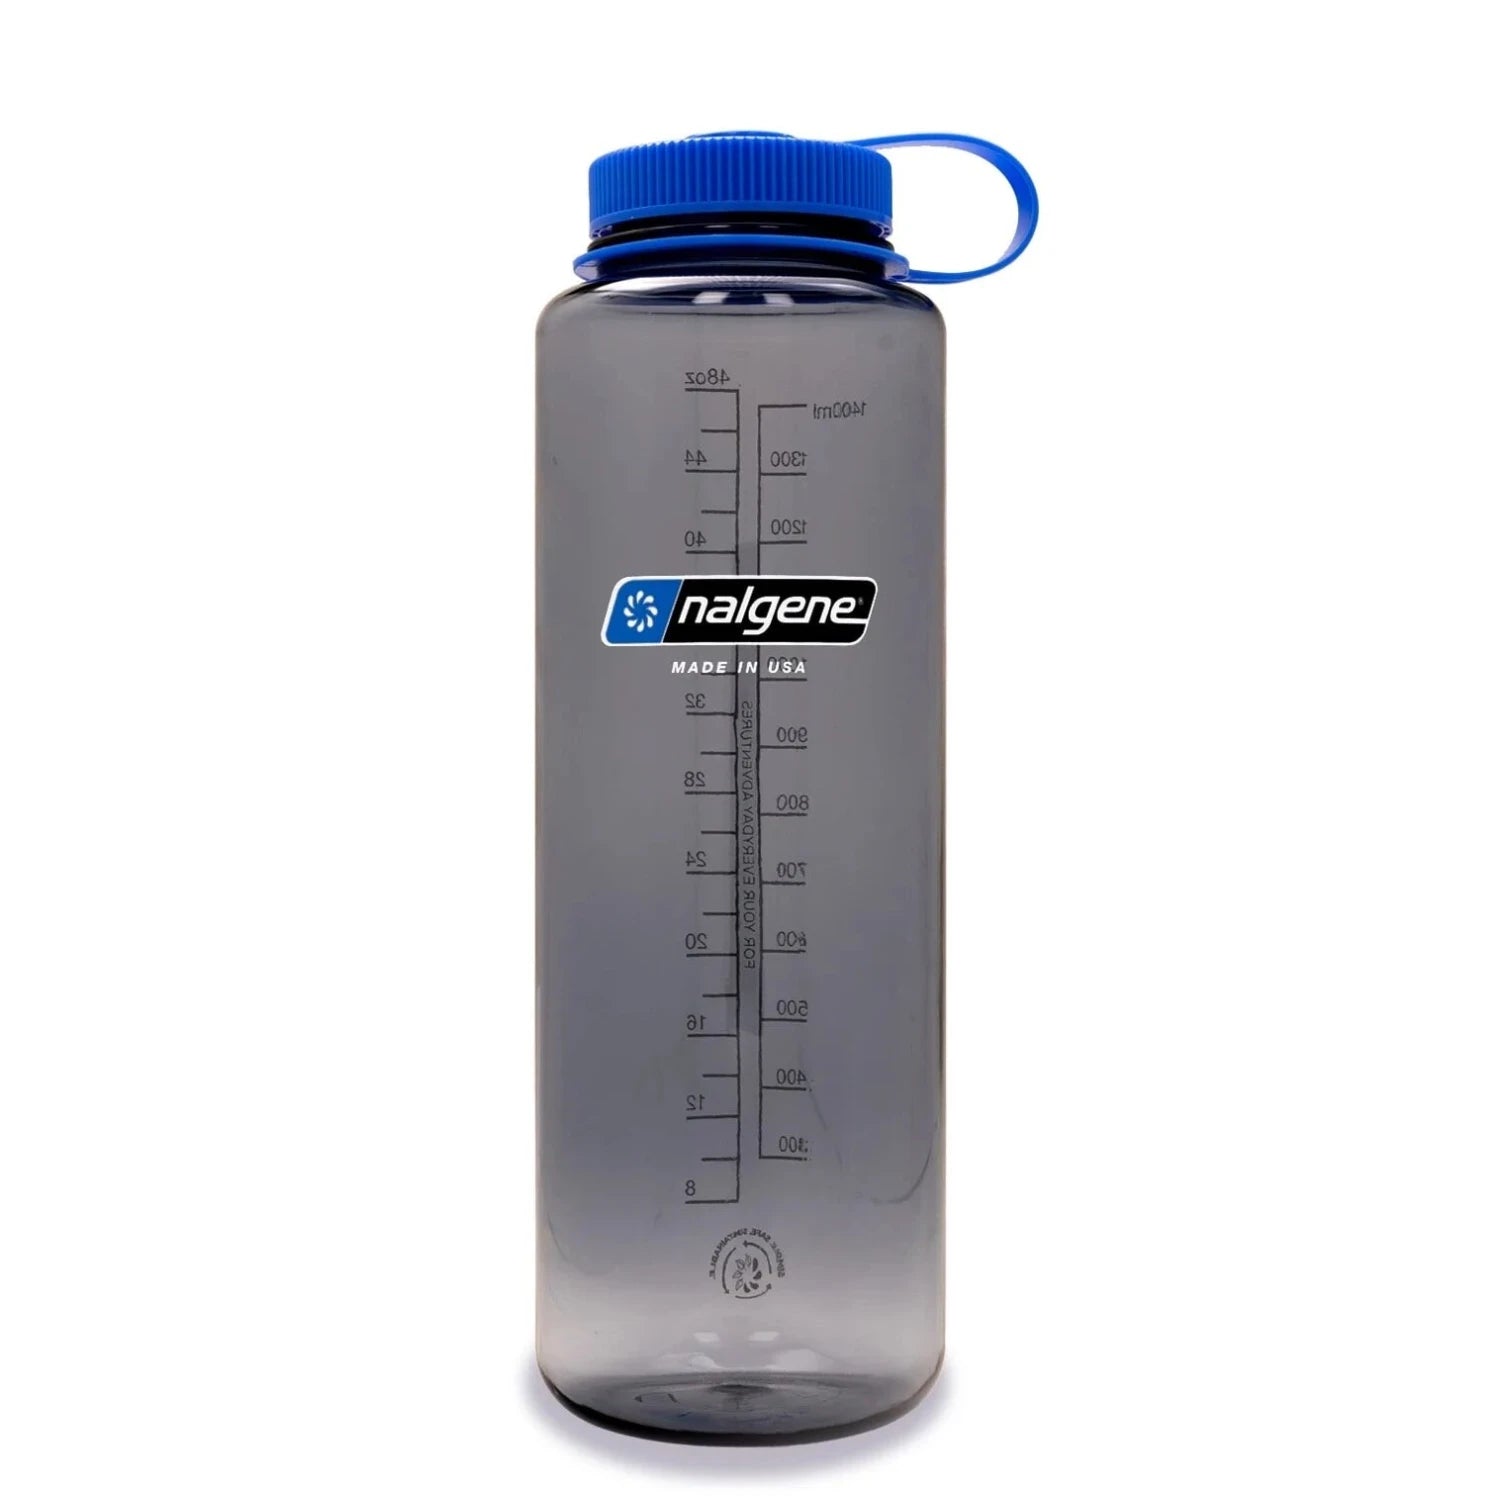 Nalgene 48oz Wide Mouth Sustain Silo Bottle shown in the Grey color option.